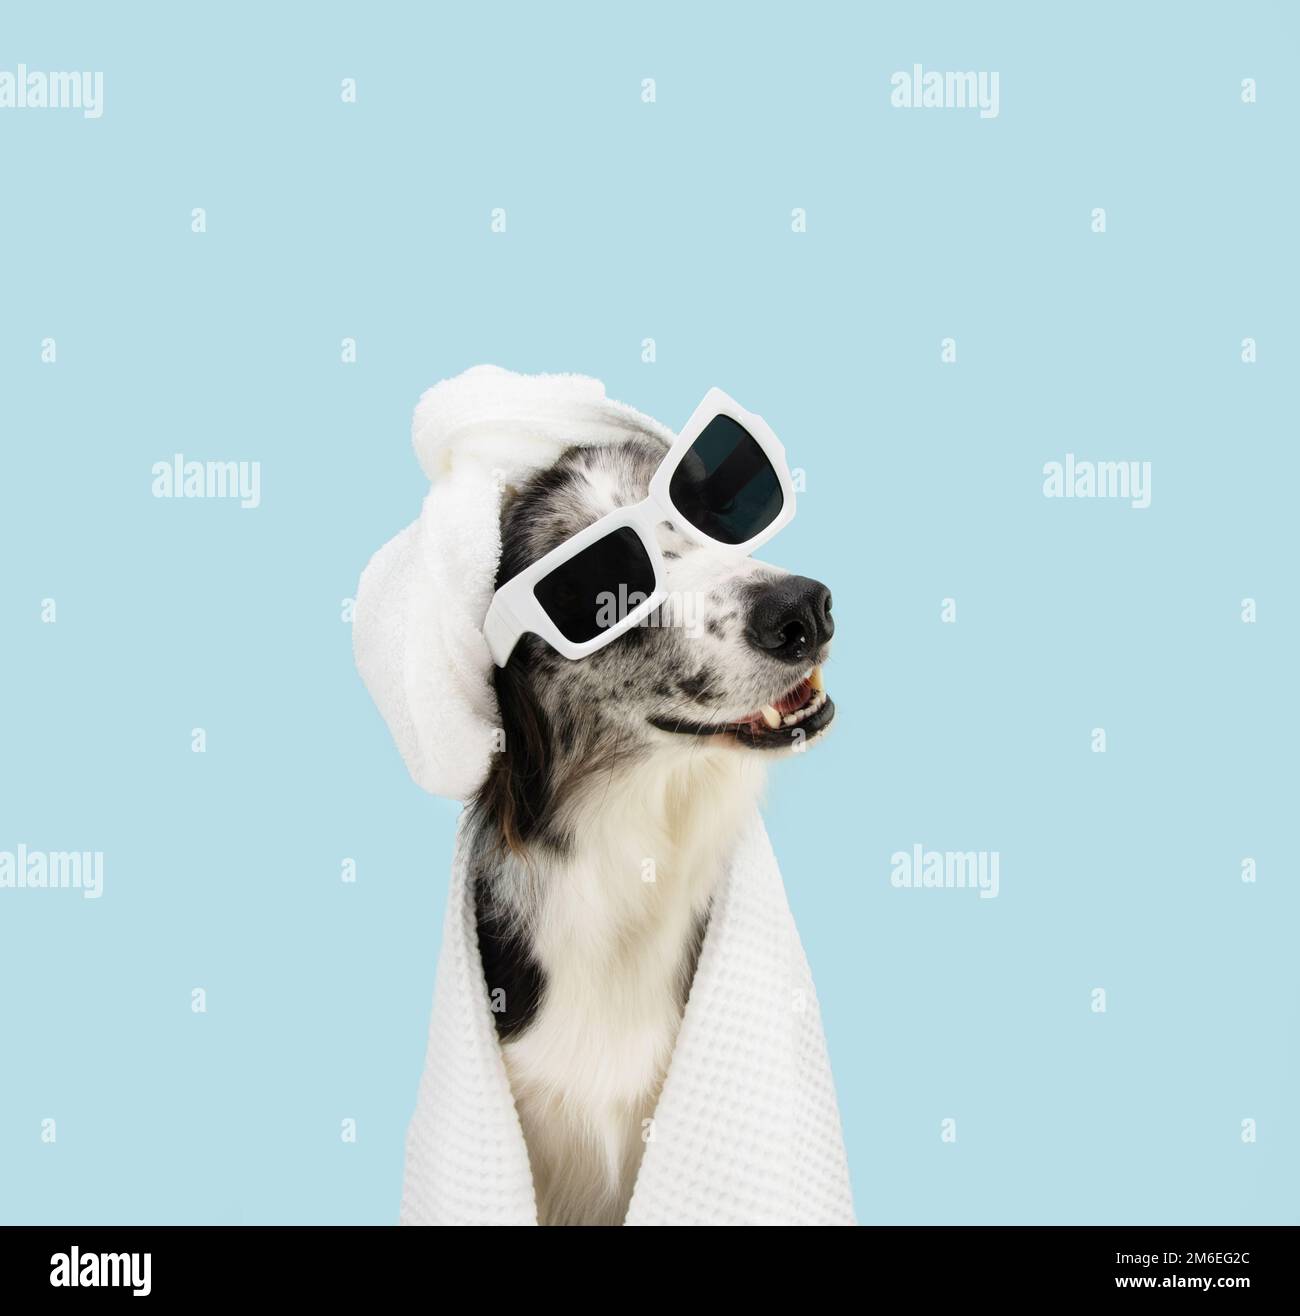 Dog summer season. Border collie puppy relaxing wrapped with a white towel and a cap shower. Spa day concept. Isolated on blue pastel background Stock Photo